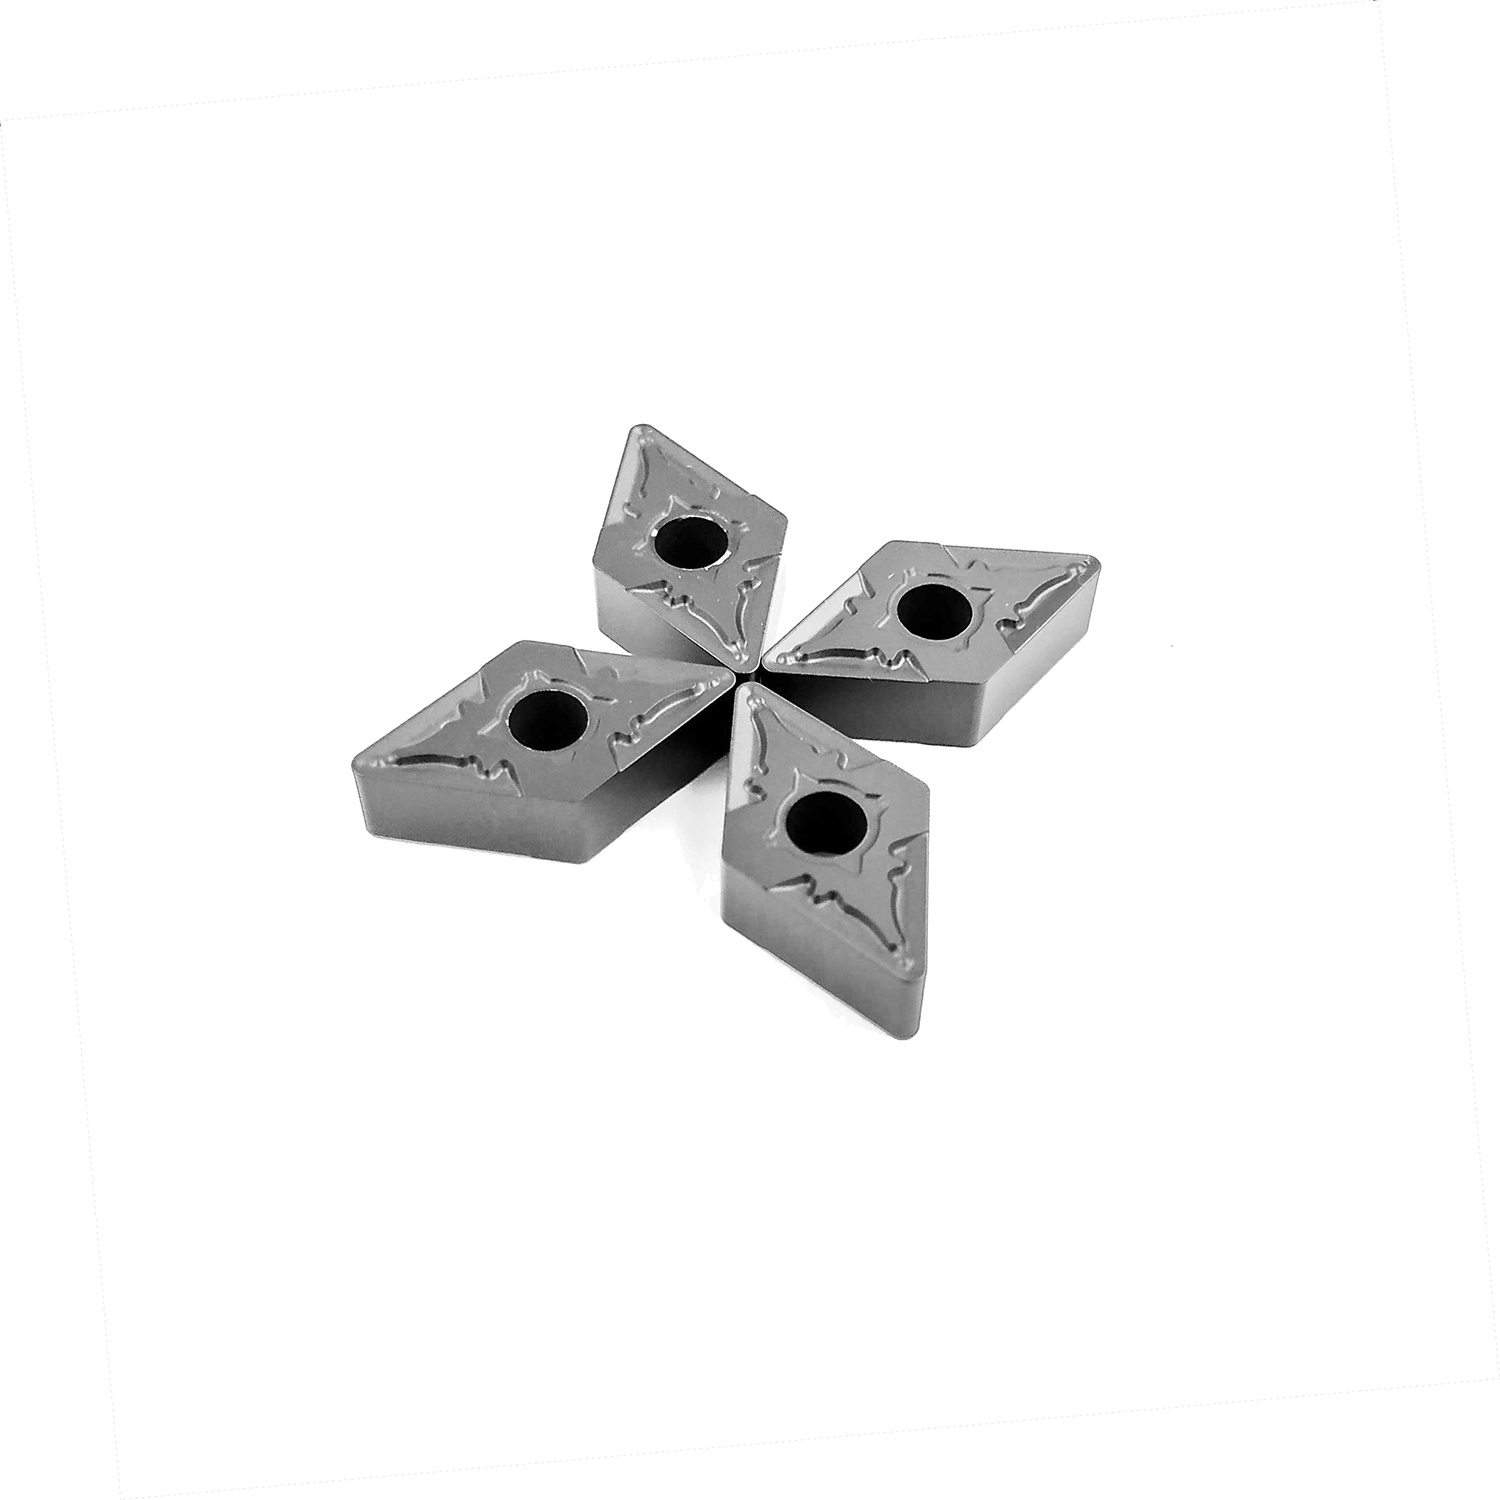 DNMG150604Tungsten carbide CNC inserts for cutting tool